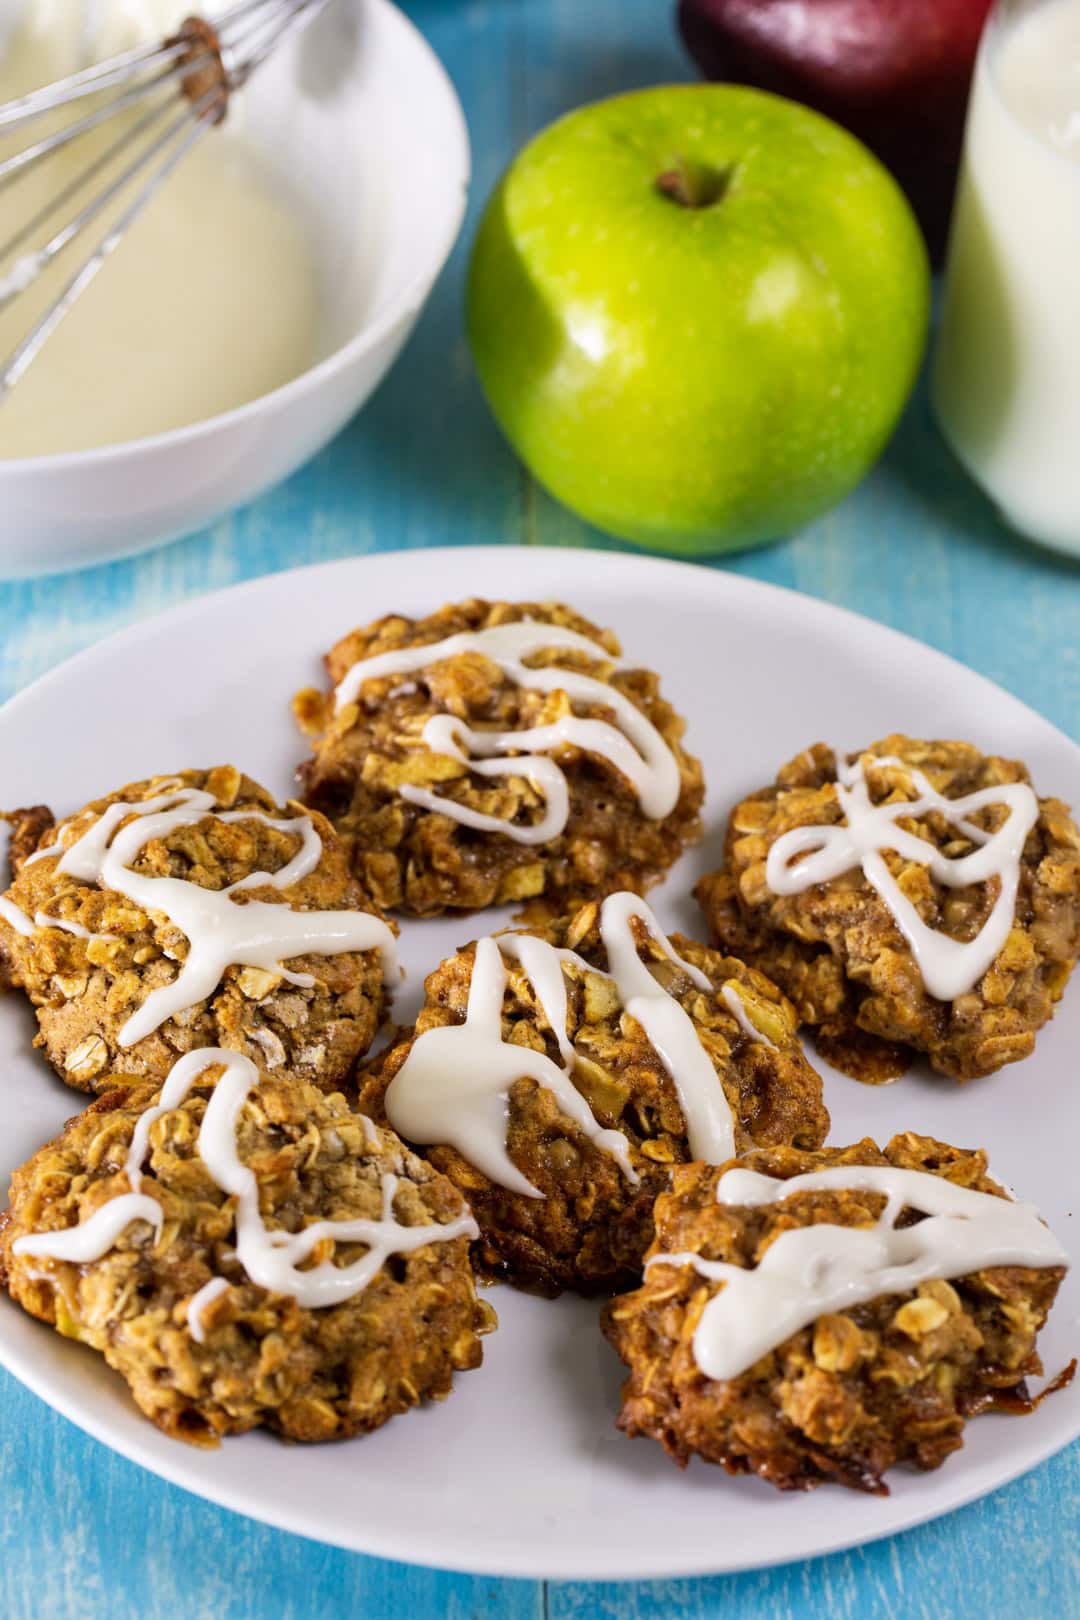 Apple Toffee Oatmeal Cookies on a plate.